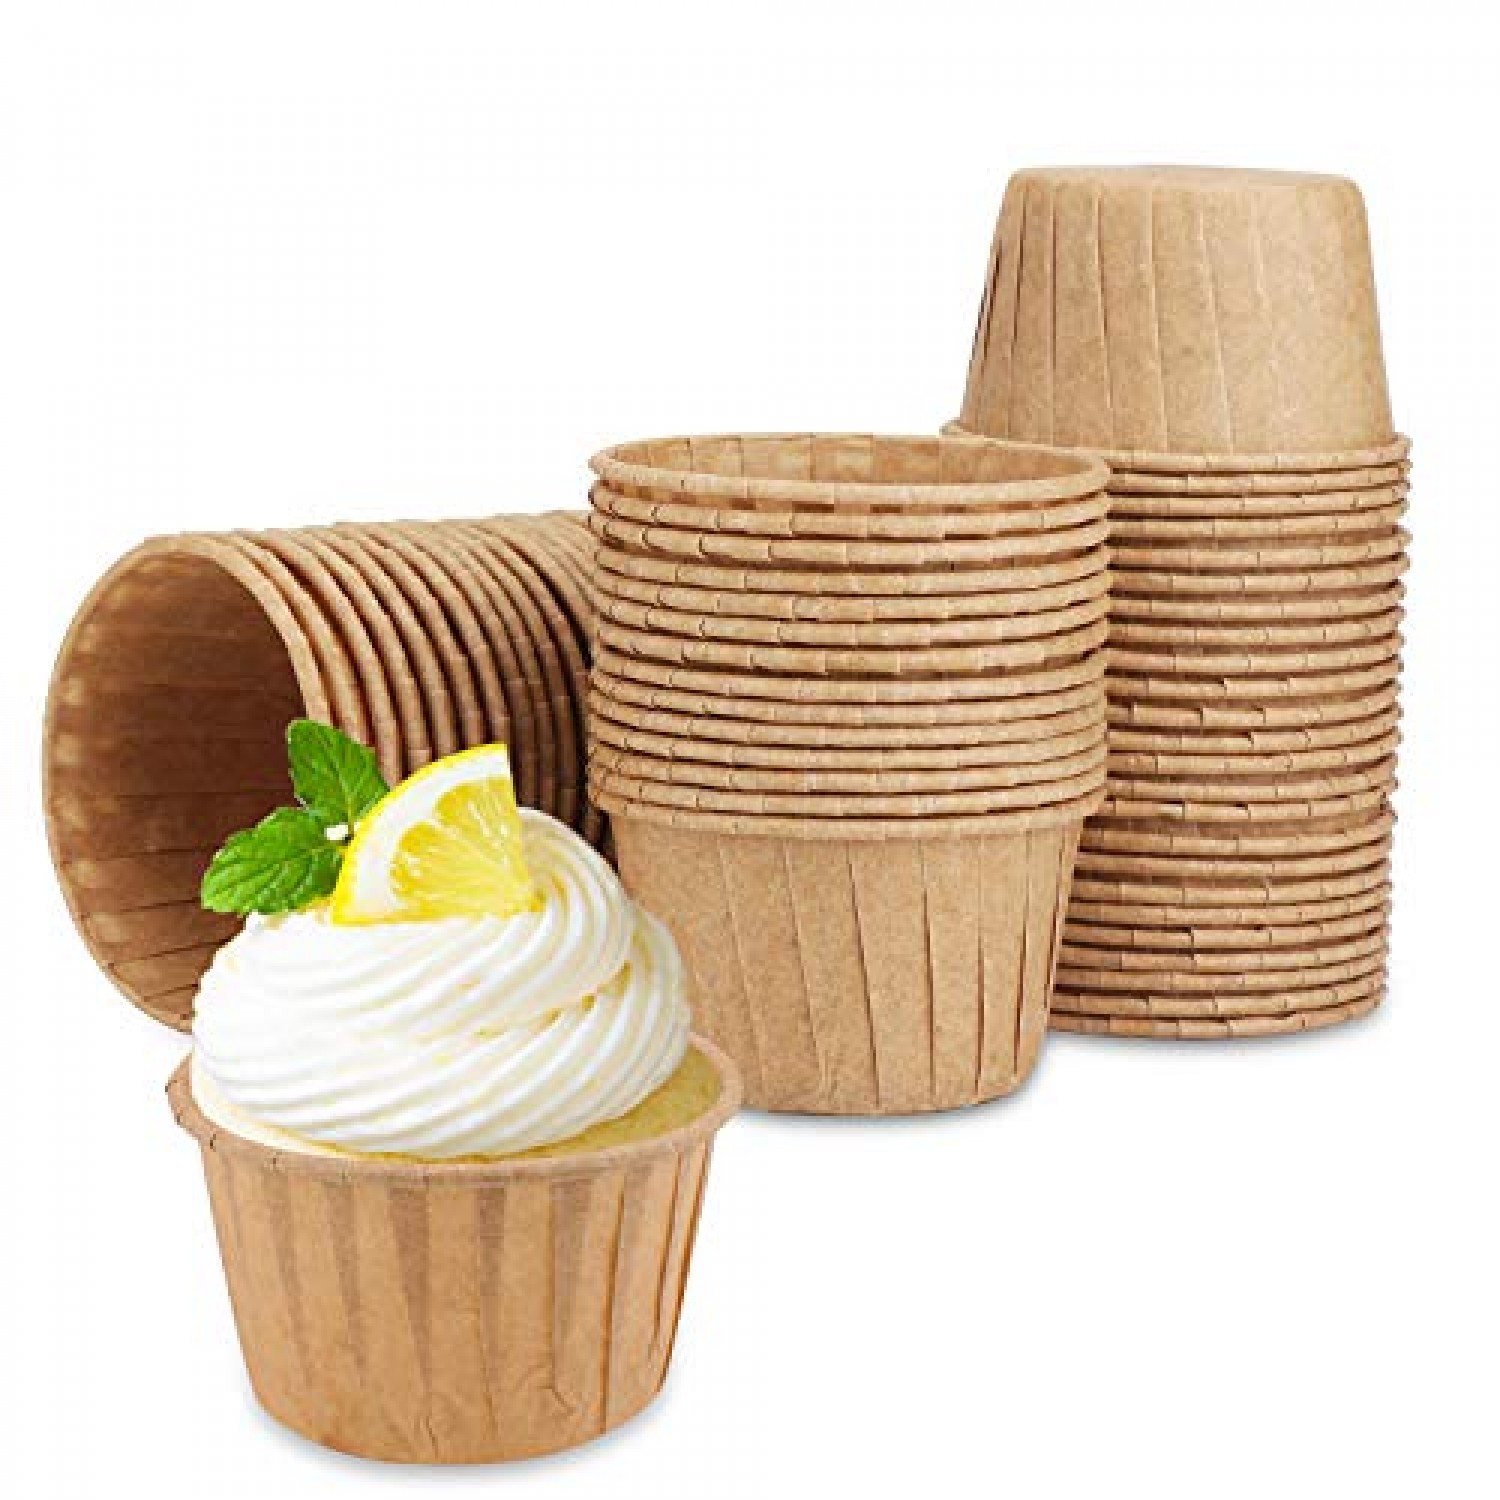 Can You Bake Cupcakes In Paper Cups Without A Pan?